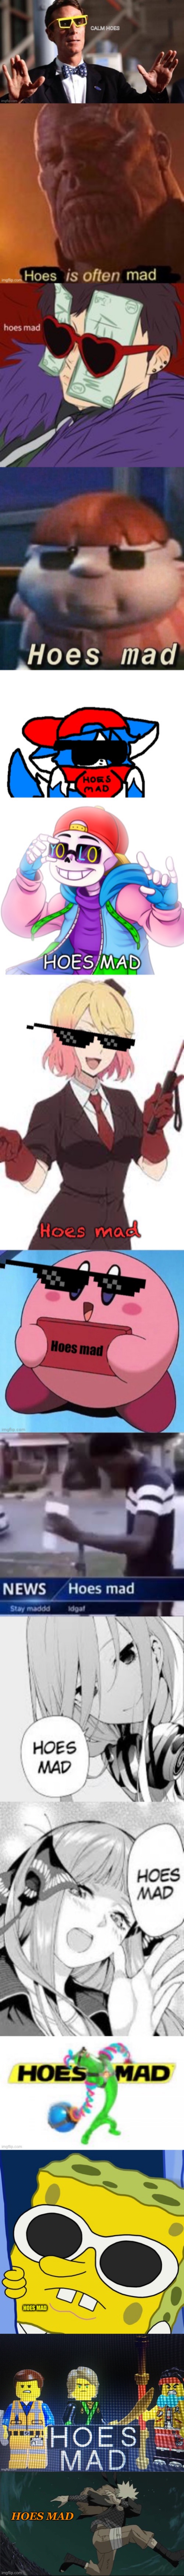 Y e | image tagged in hoes mad,hoes mad but in lego,naruto hoes mad | made w/ Imgflip meme maker